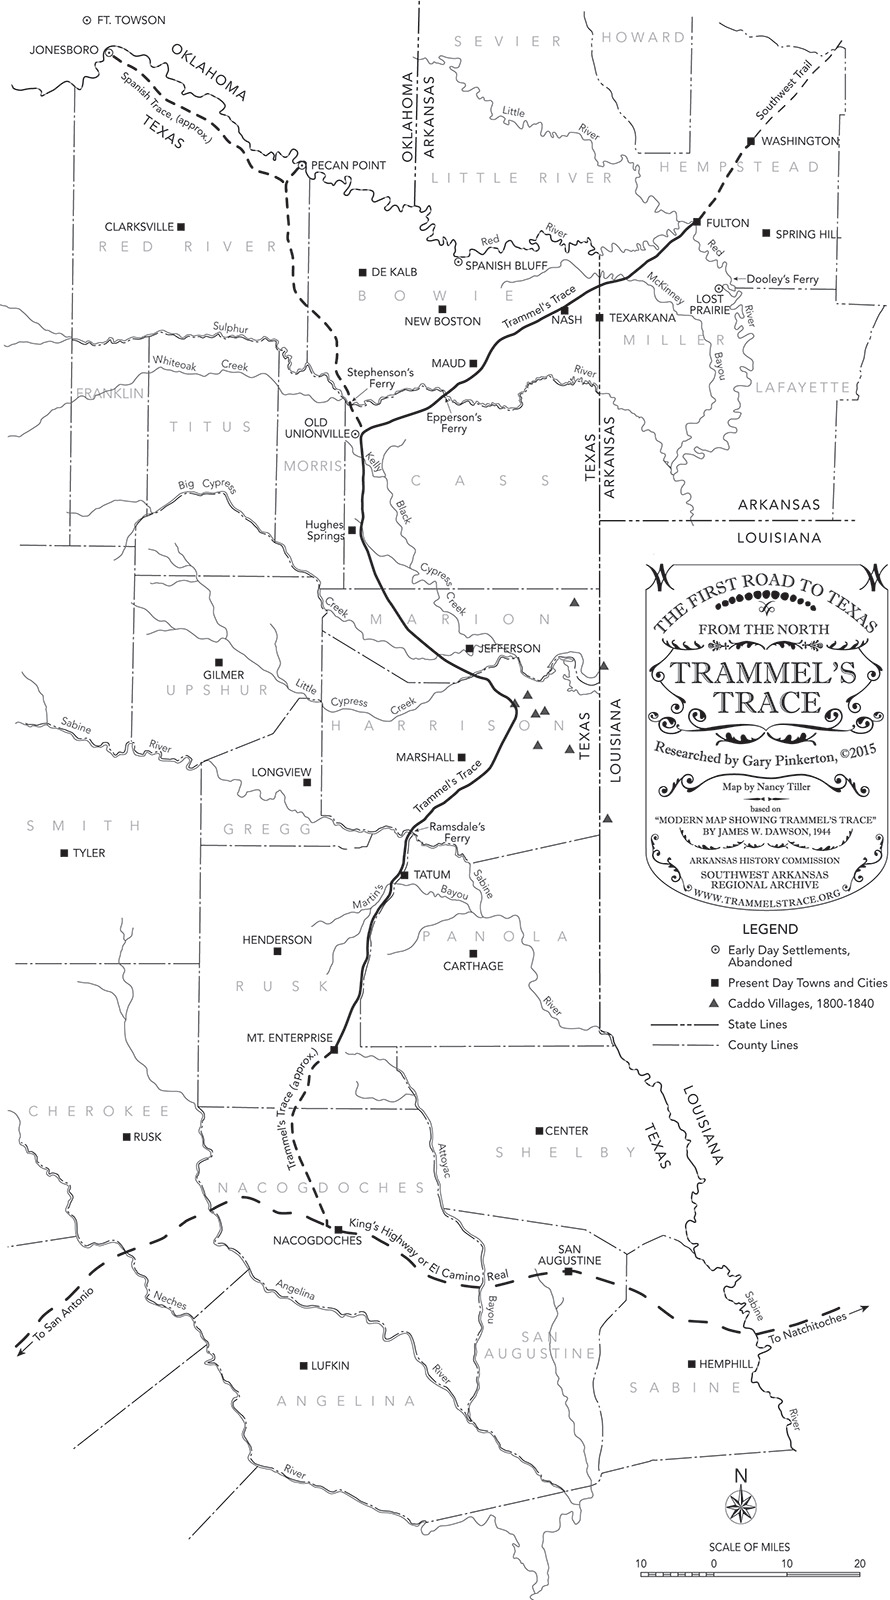 Political map showing parts of Texas Oklahoma and Arkansas with dotted lines and trail on it